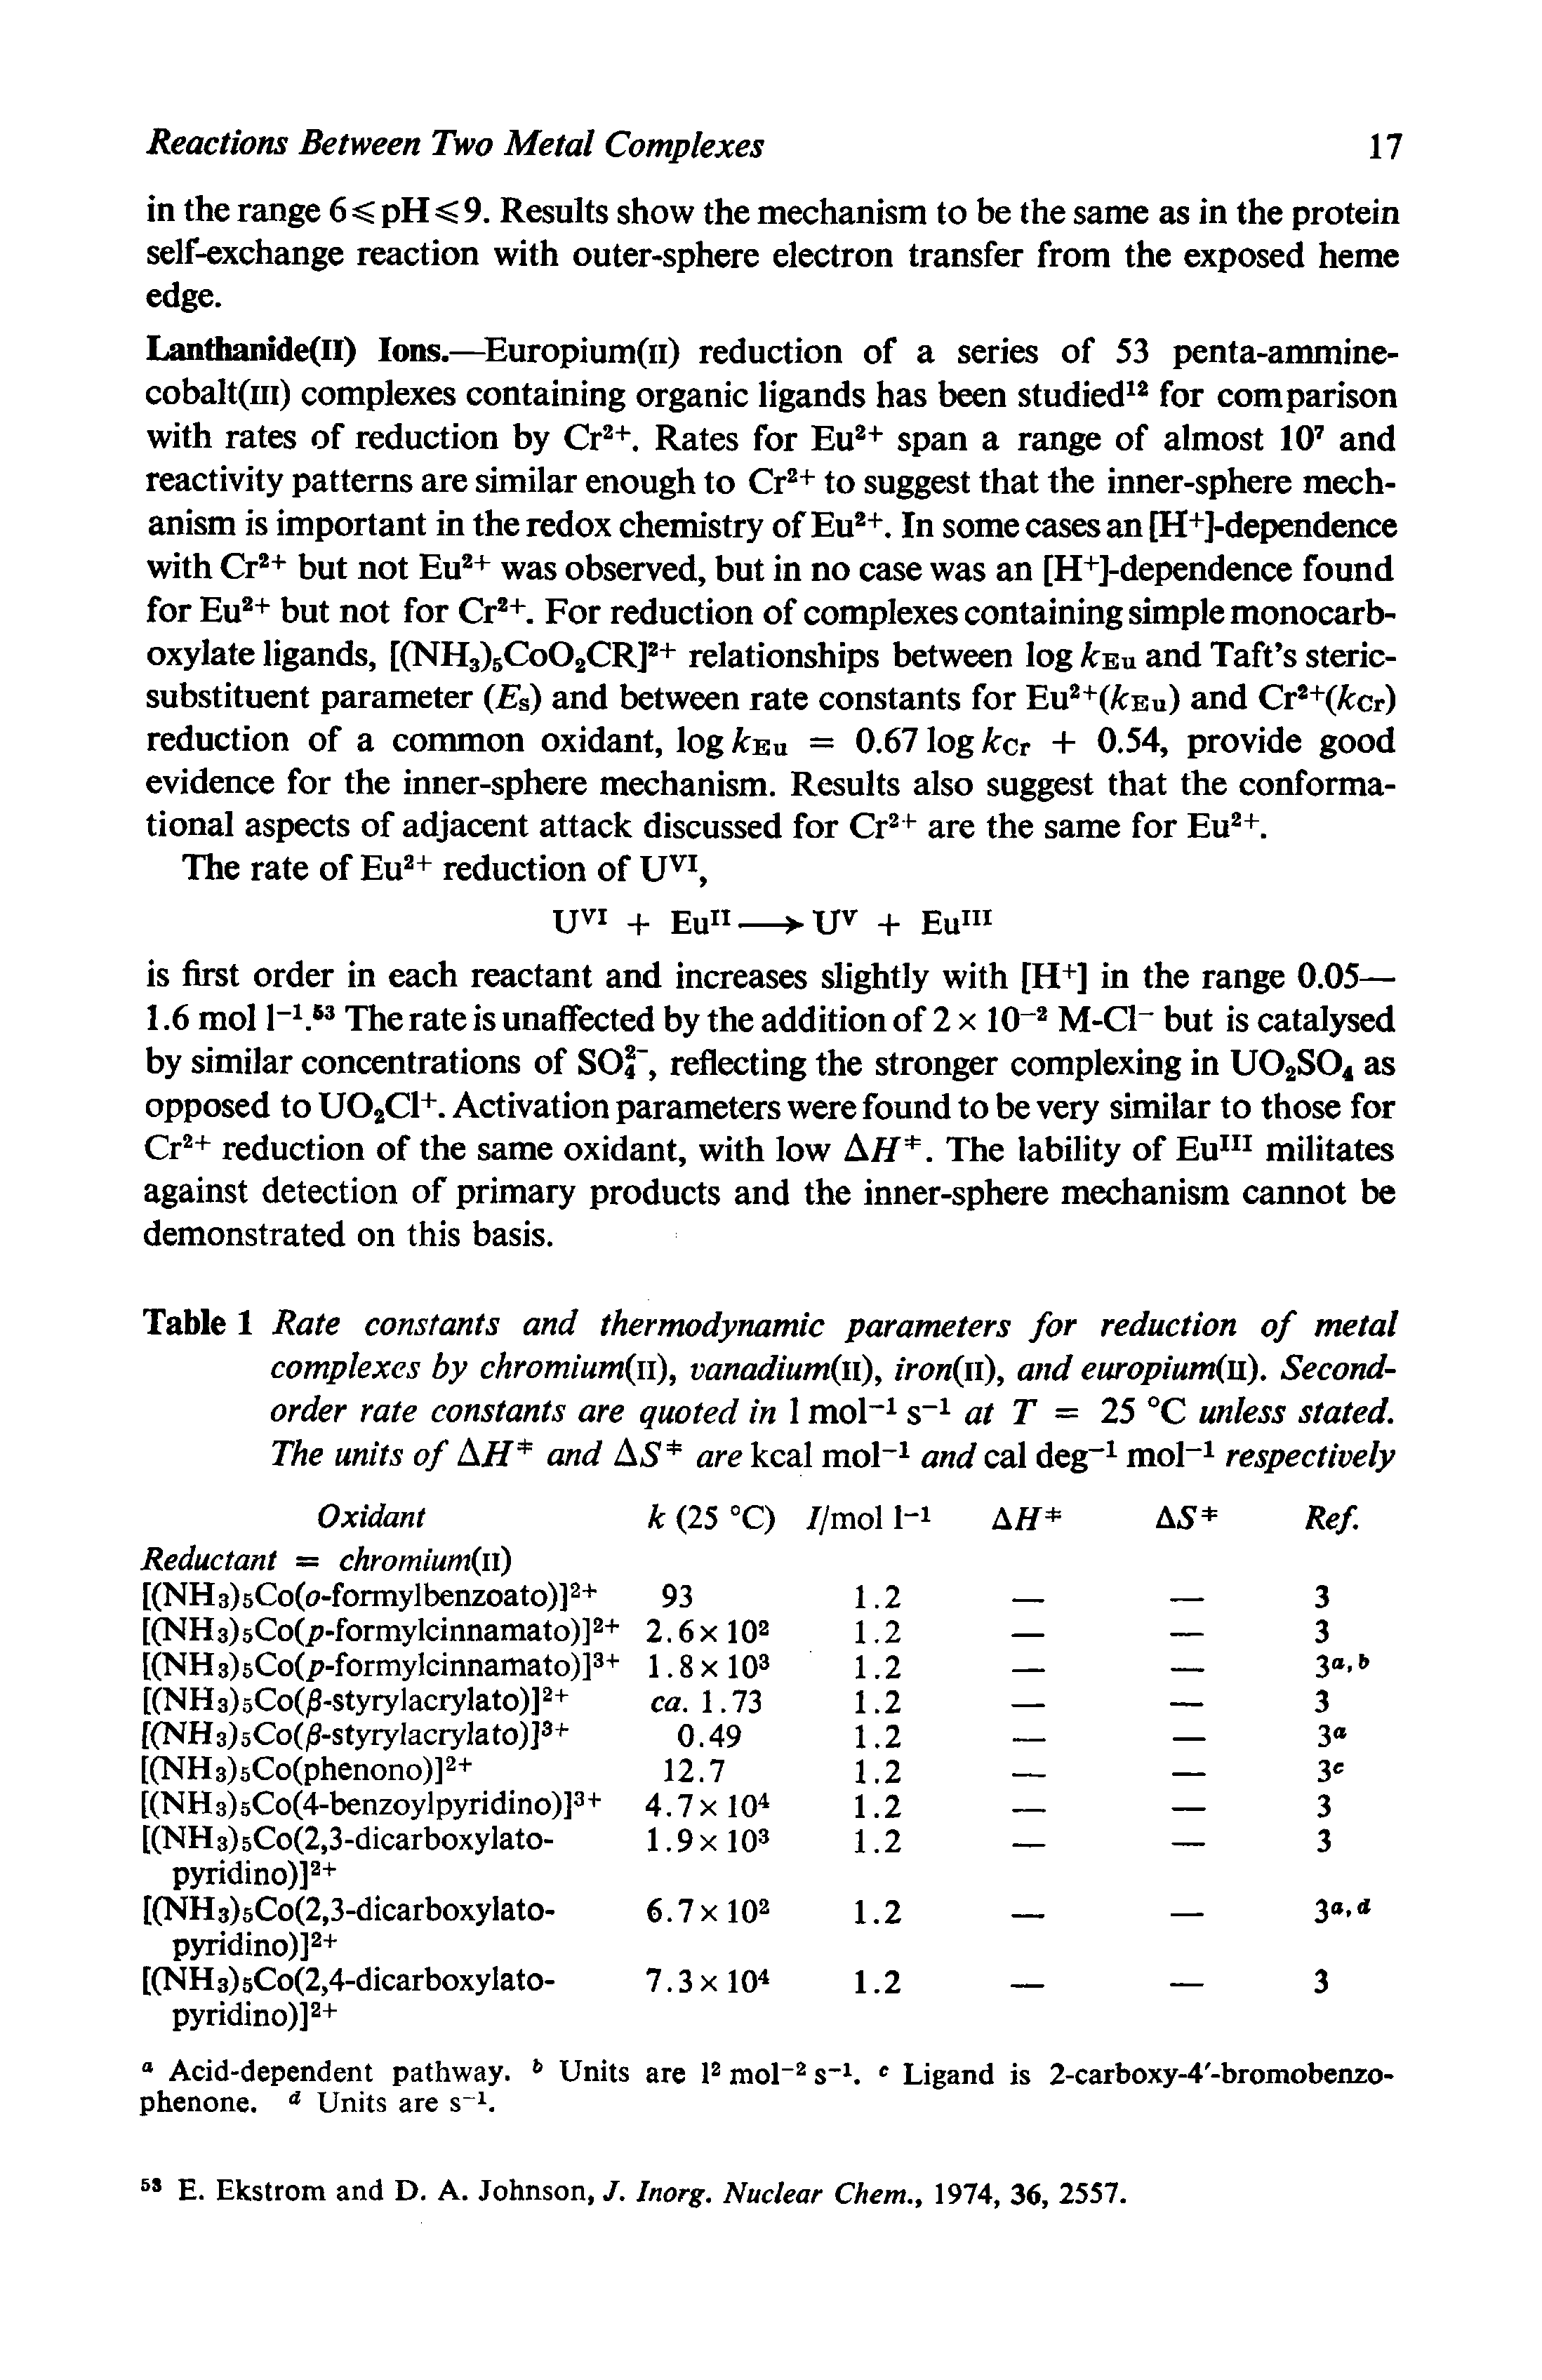 Table 1 Rate constants and thermodynamic parameters for reduction of metal complexes by chromium(ii), vanadium(ii), iron(ii), and europium(u). Second-order rate constants are quoted in 1 mol s at T = 25 "C unless stated. The units of AH and AS are kcal mol and cal deg mol respectively...